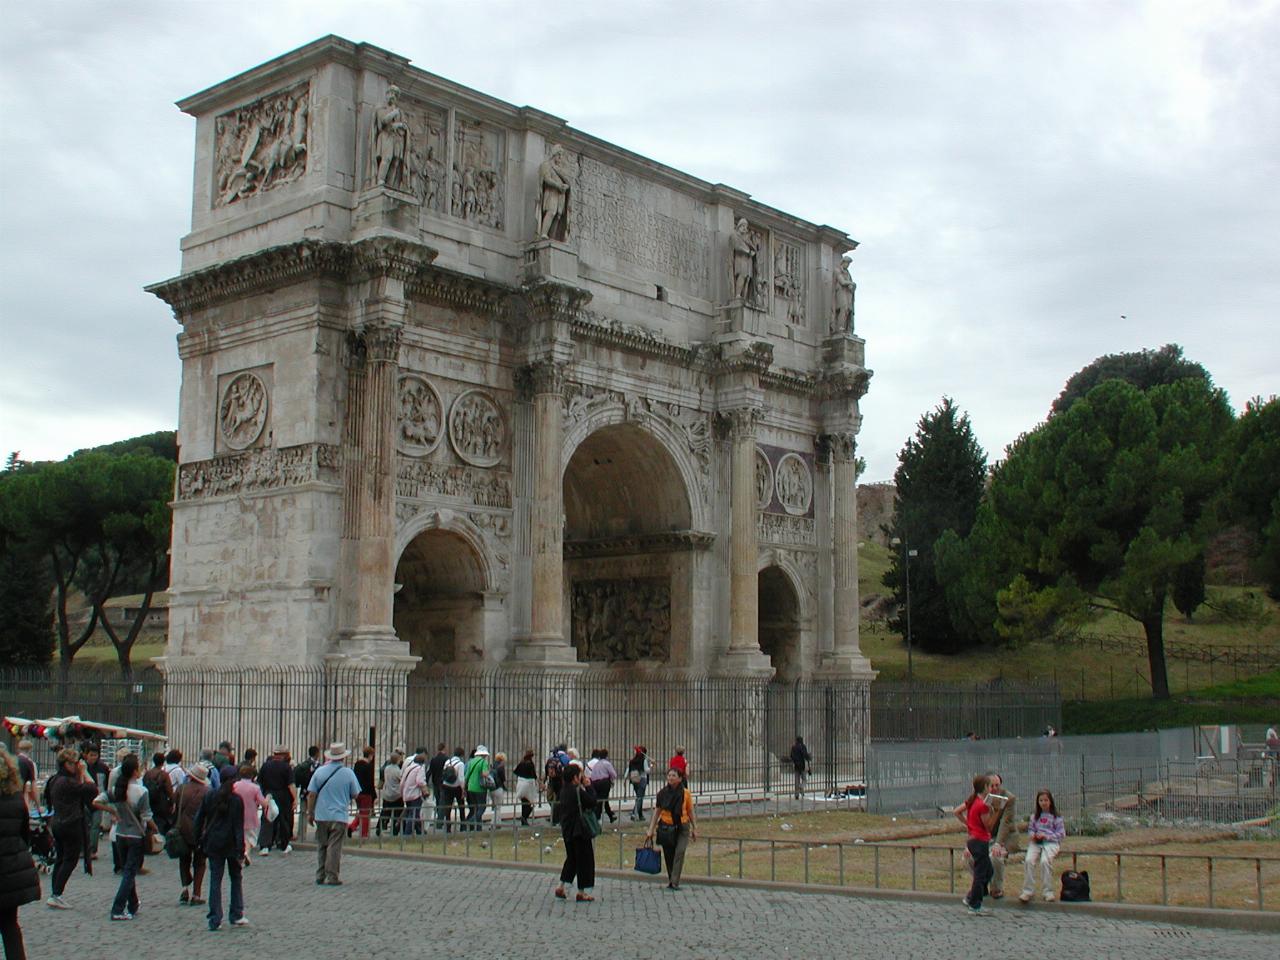 The Arch of Constantine (near Colosseum)